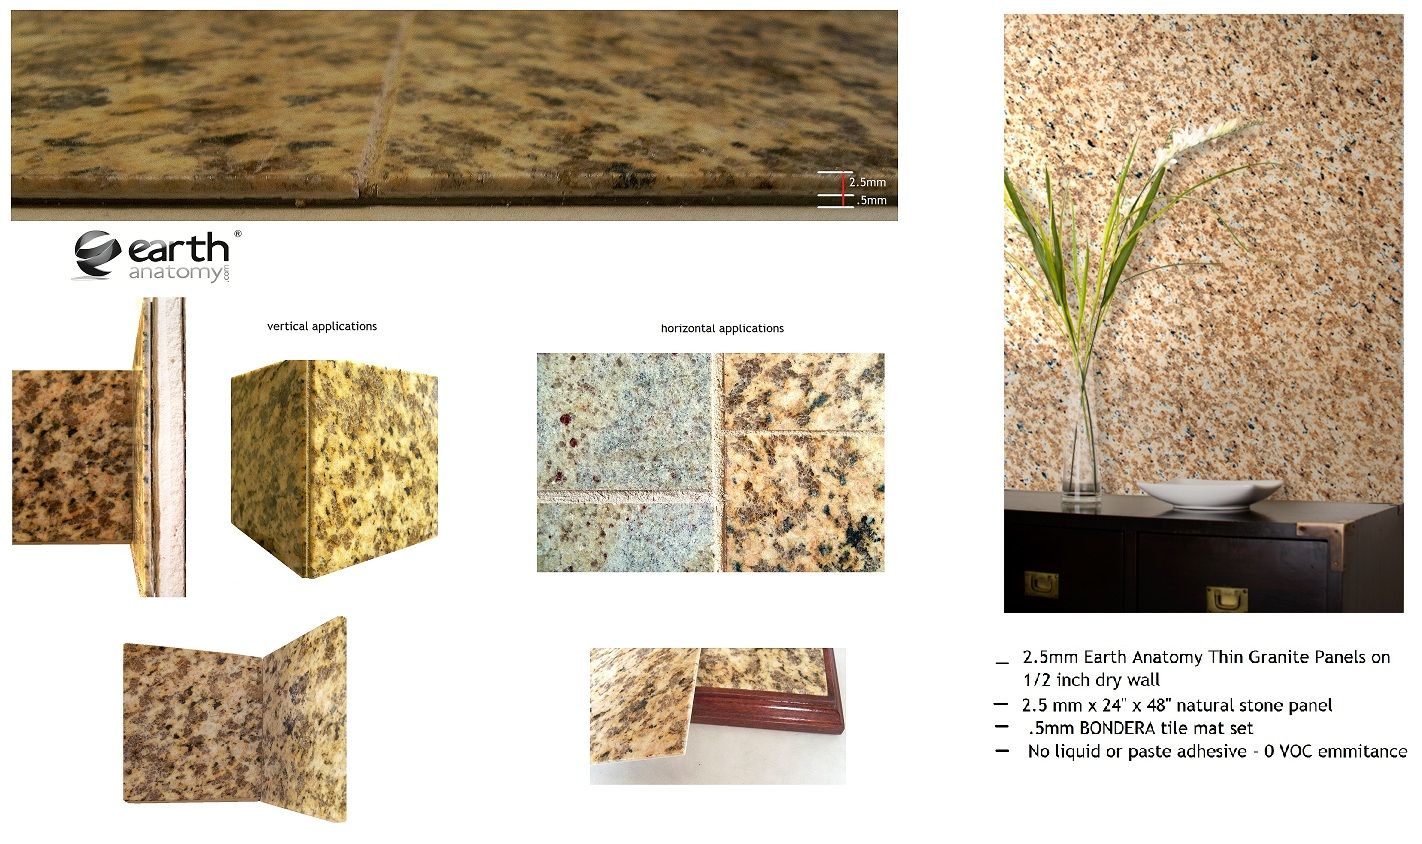 Grizzly Partners, LLC Home Of EARTH ANATOMY ULTRA THIN GRANITE Main Image